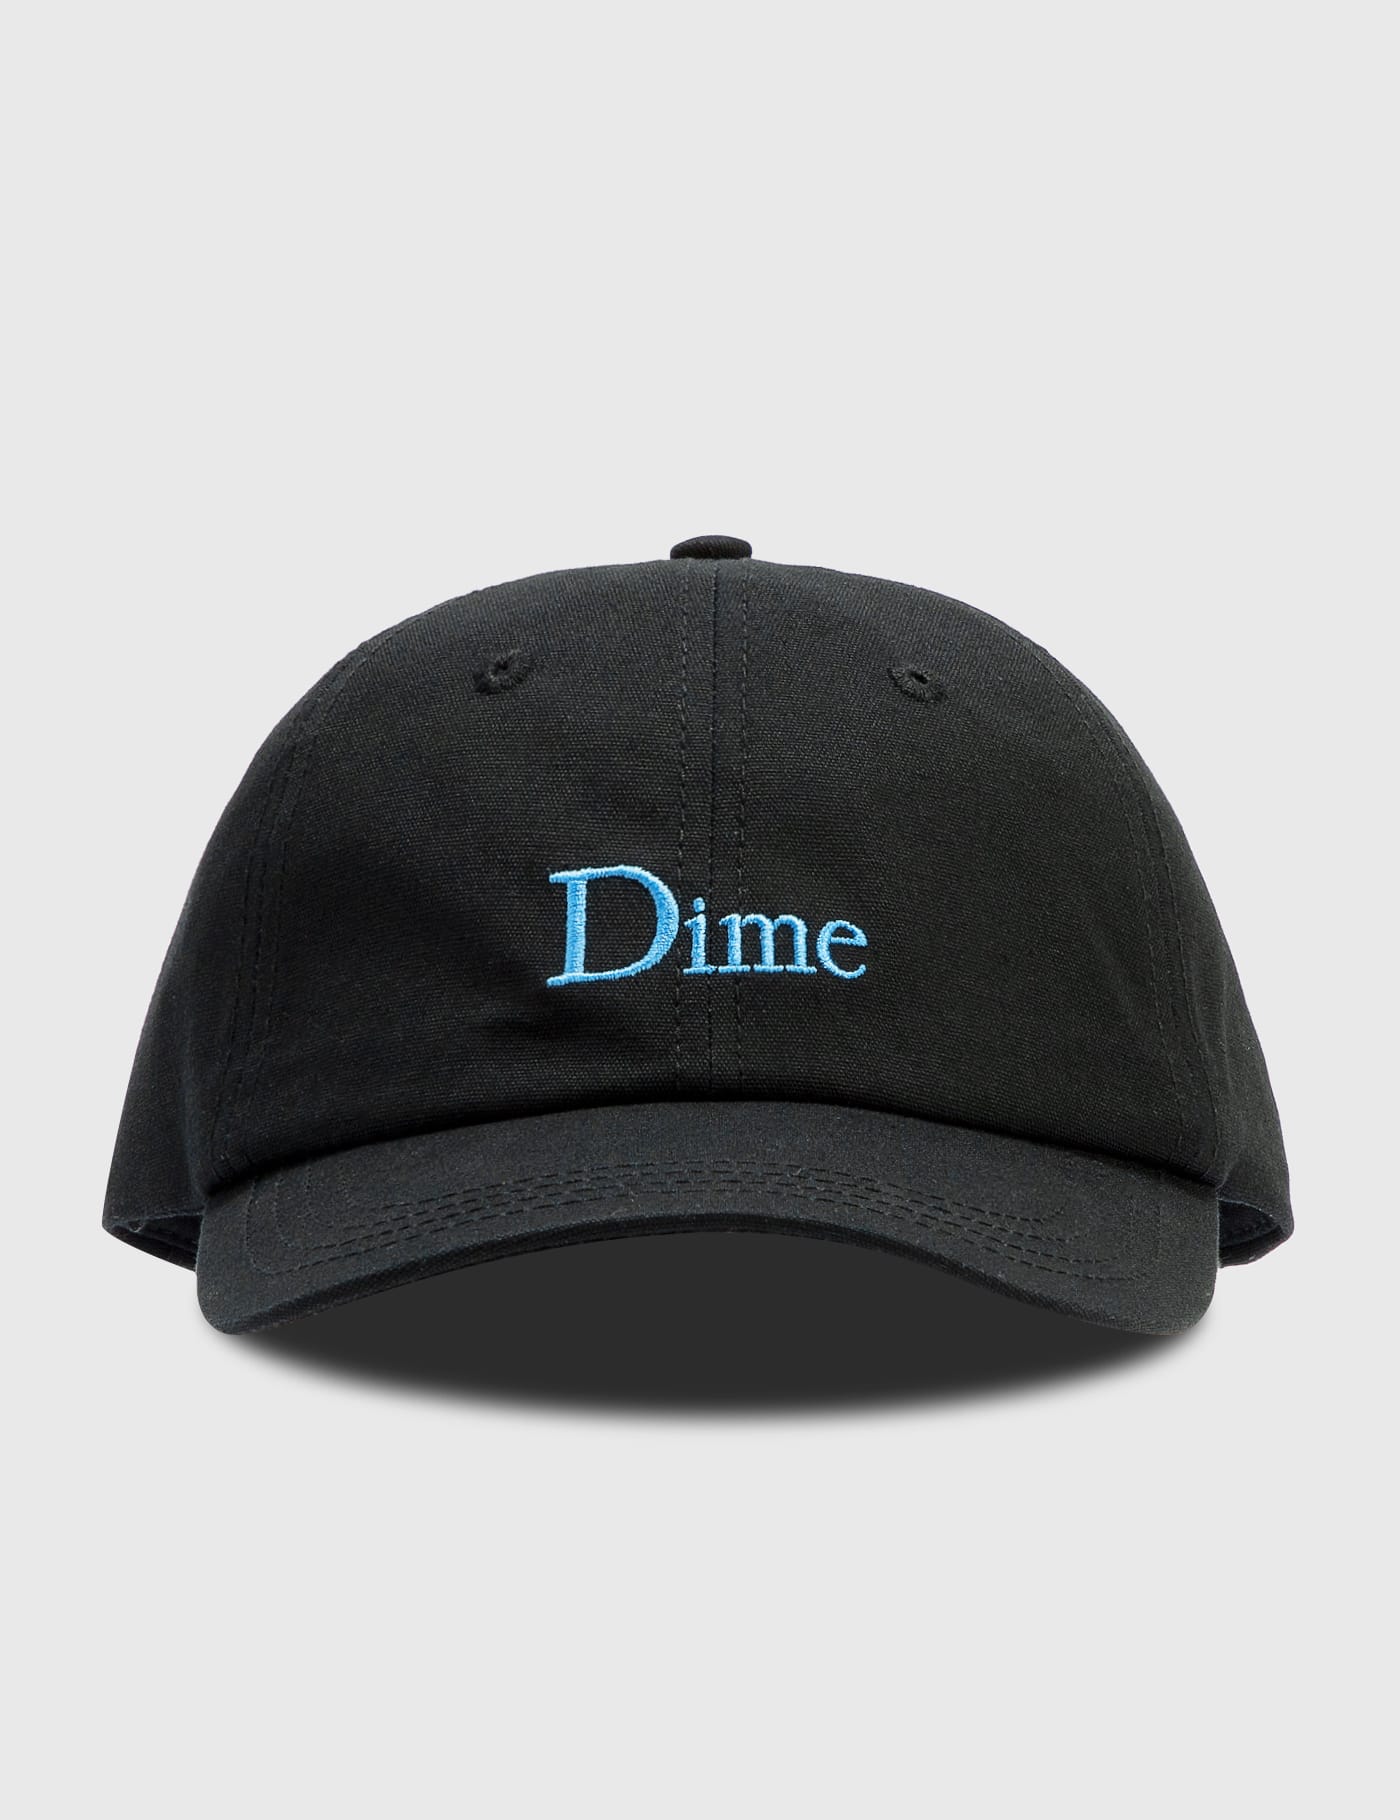 Dime - Classic Cap | HBX - Globally Curated Fashion and Lifestyle